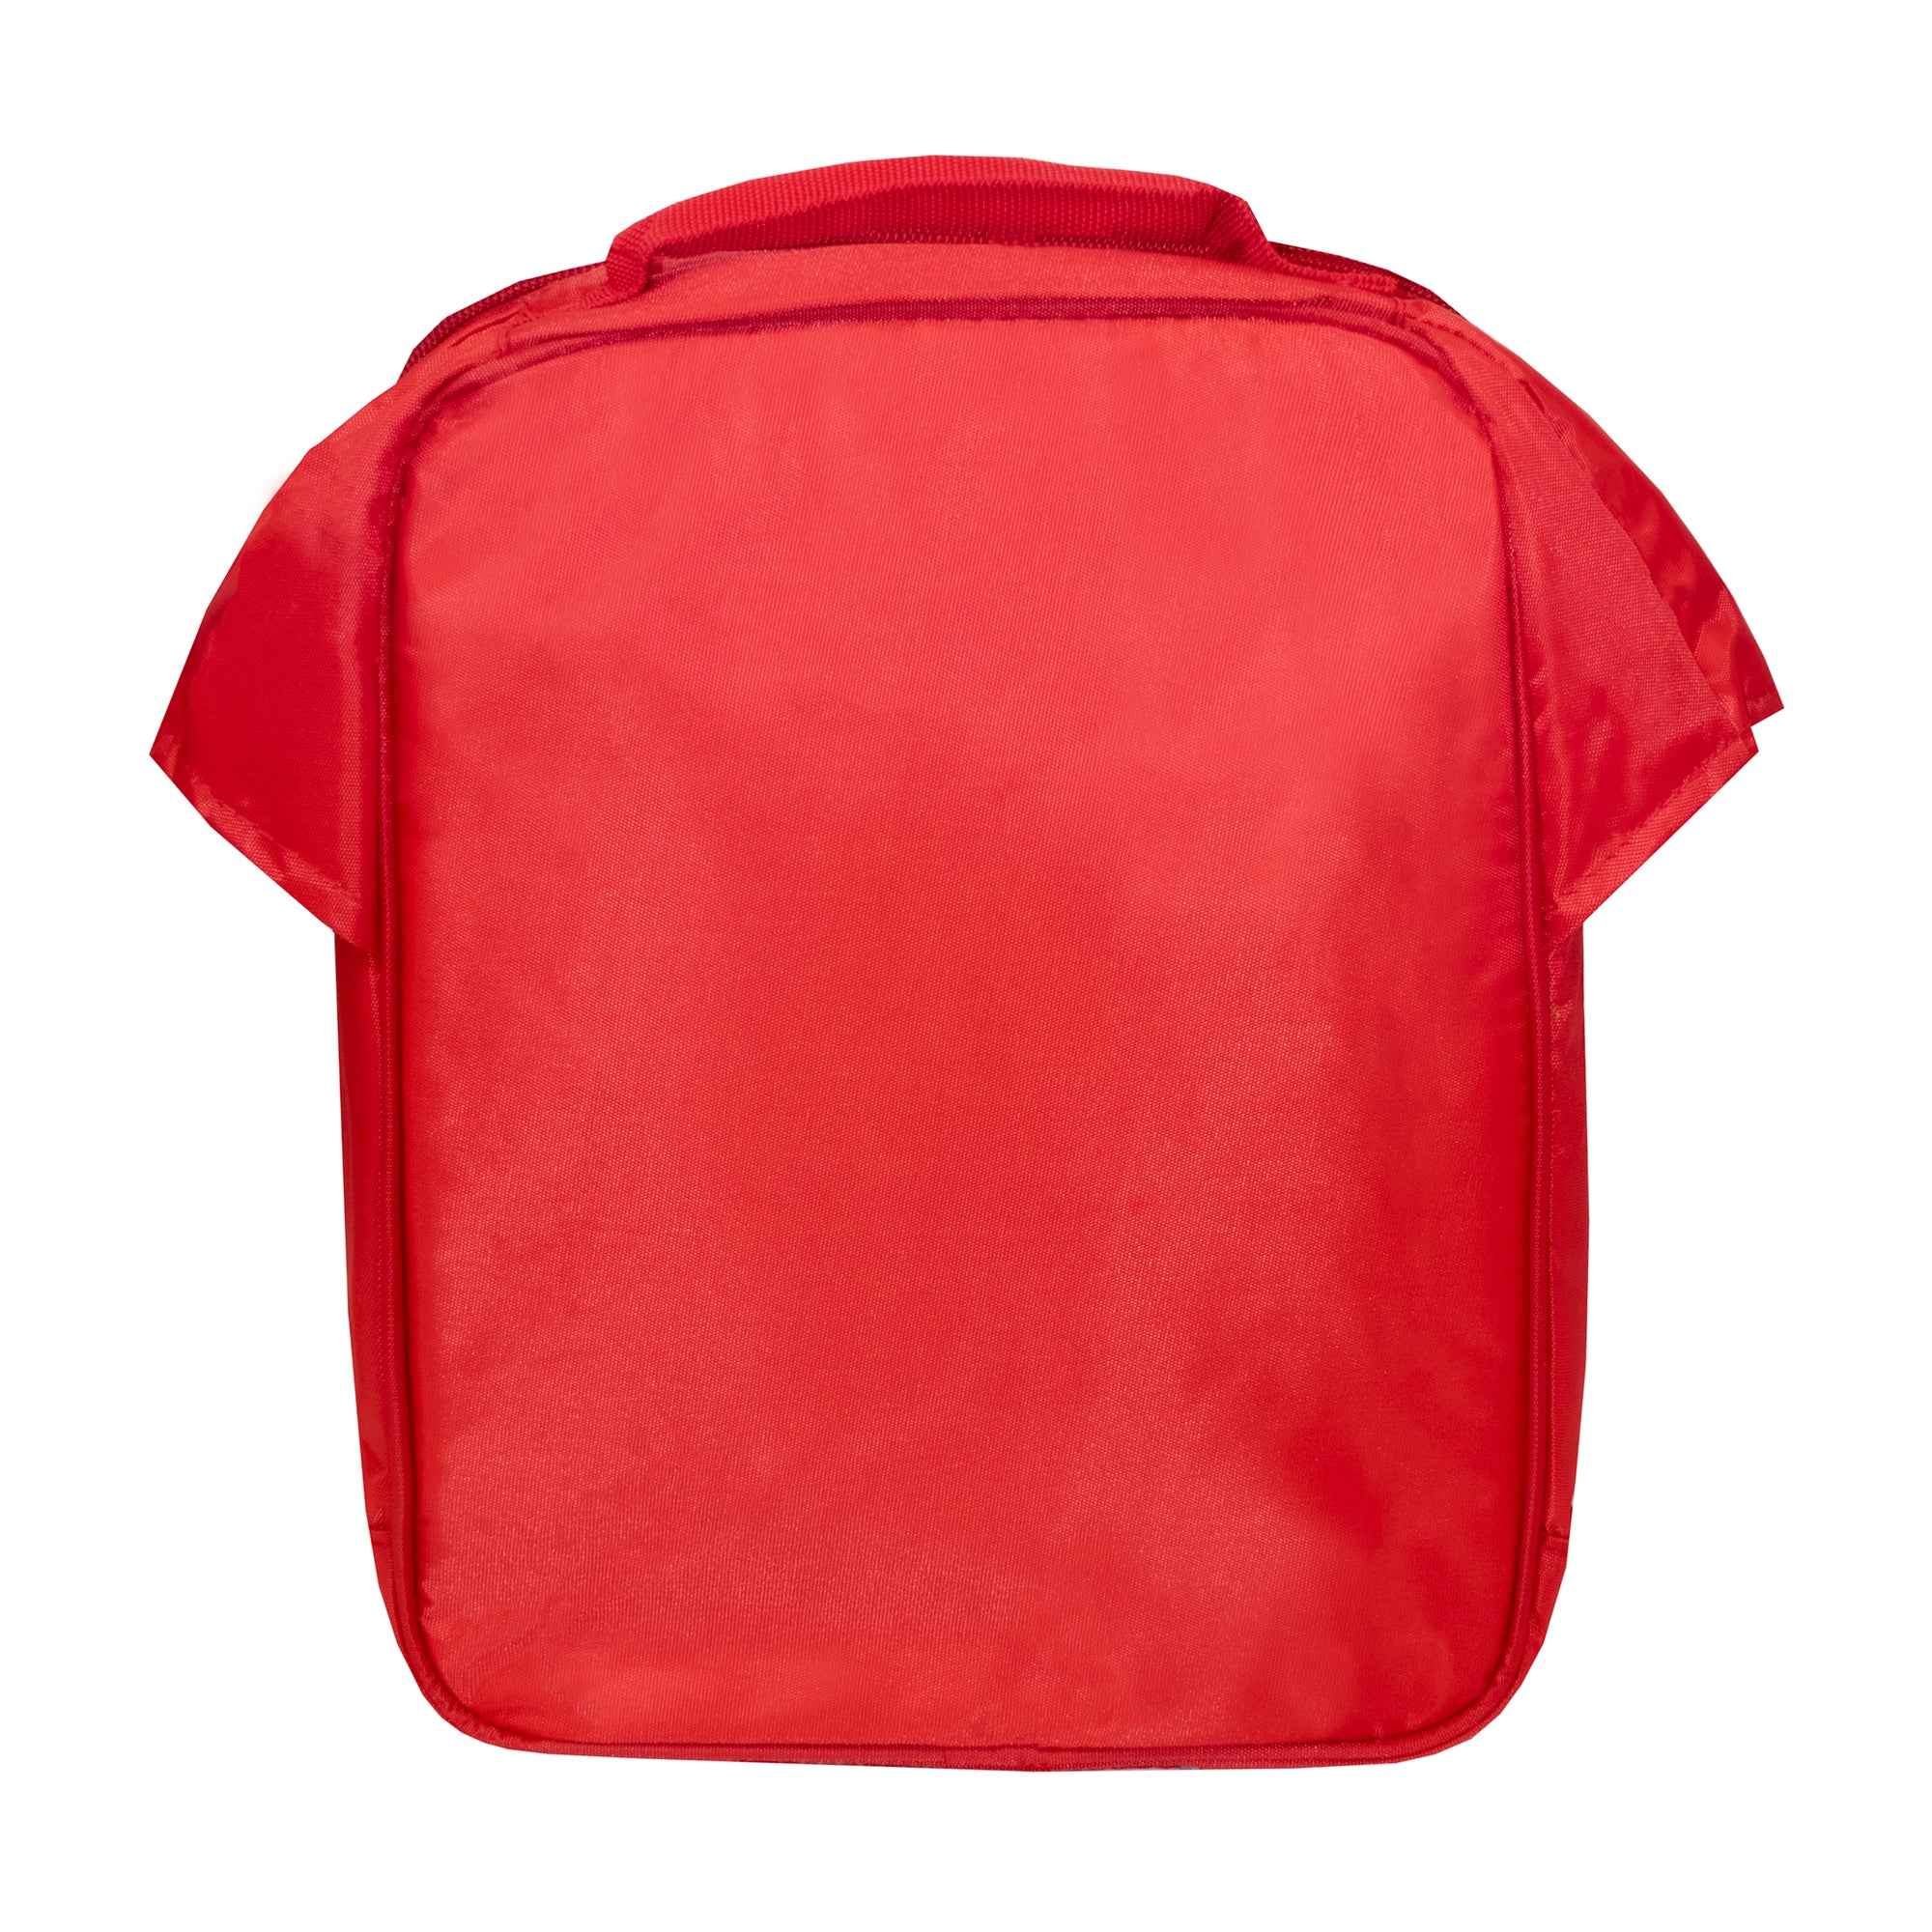 lunchbag-red-back-worldcup-productimage_2d02049a-f6bc-417d-804a-9b664d191baa.jpg